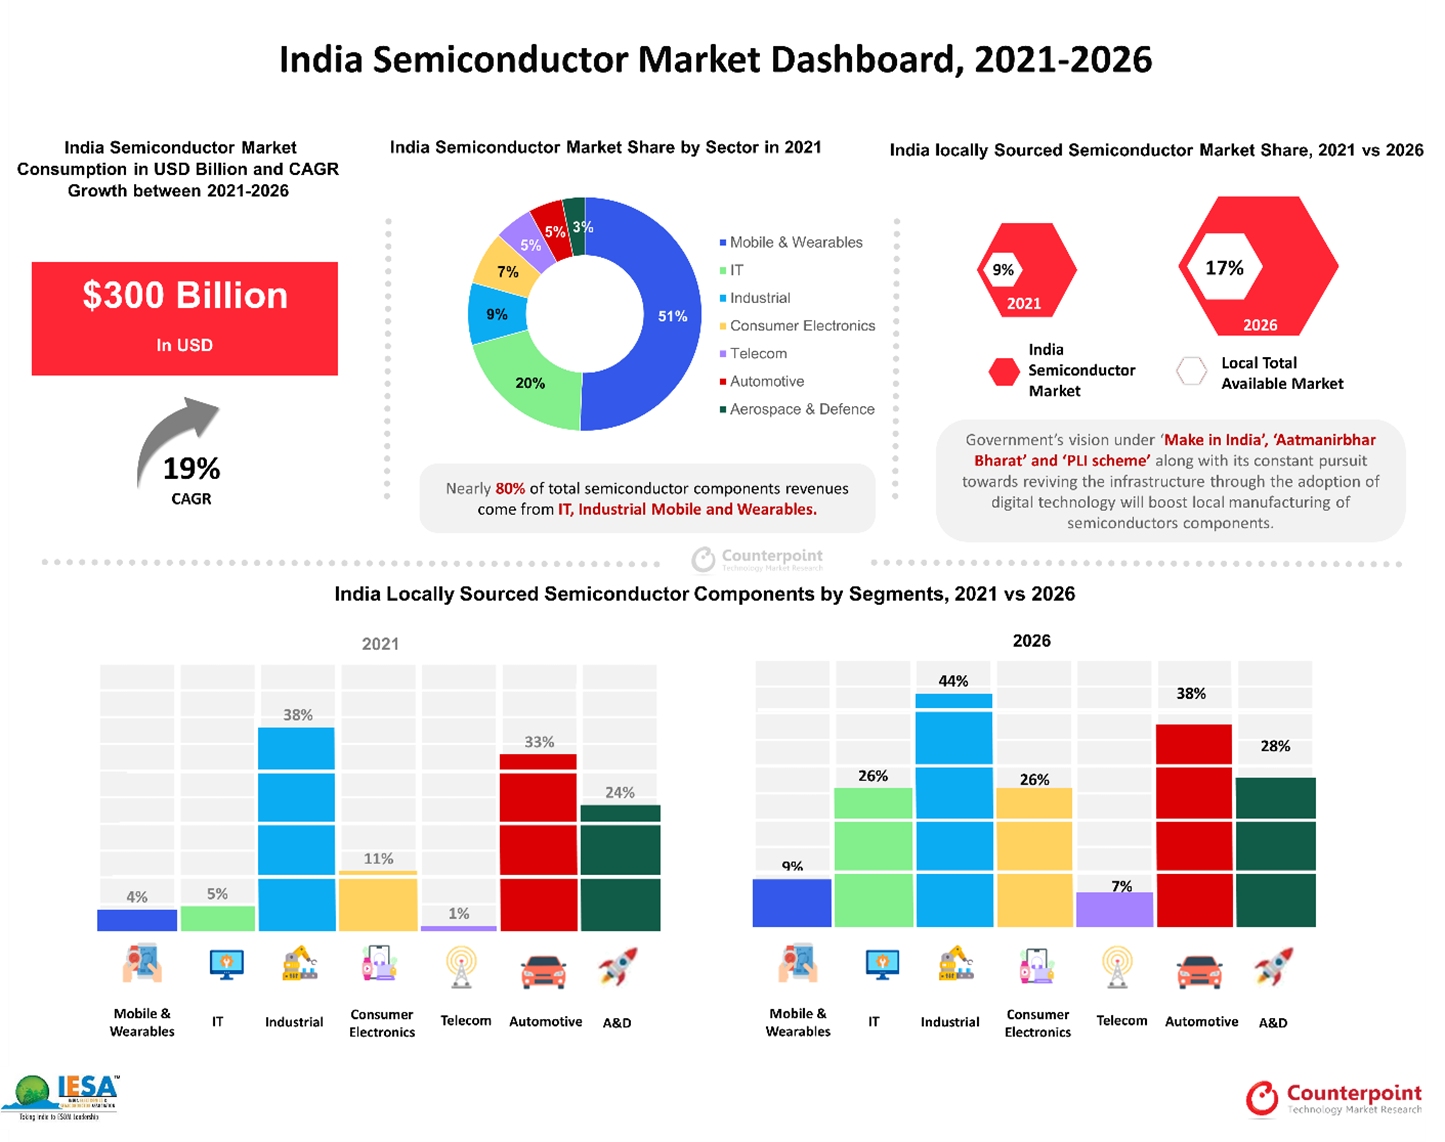 India Semiconductor Components Consumption to Reach 300 Billion During